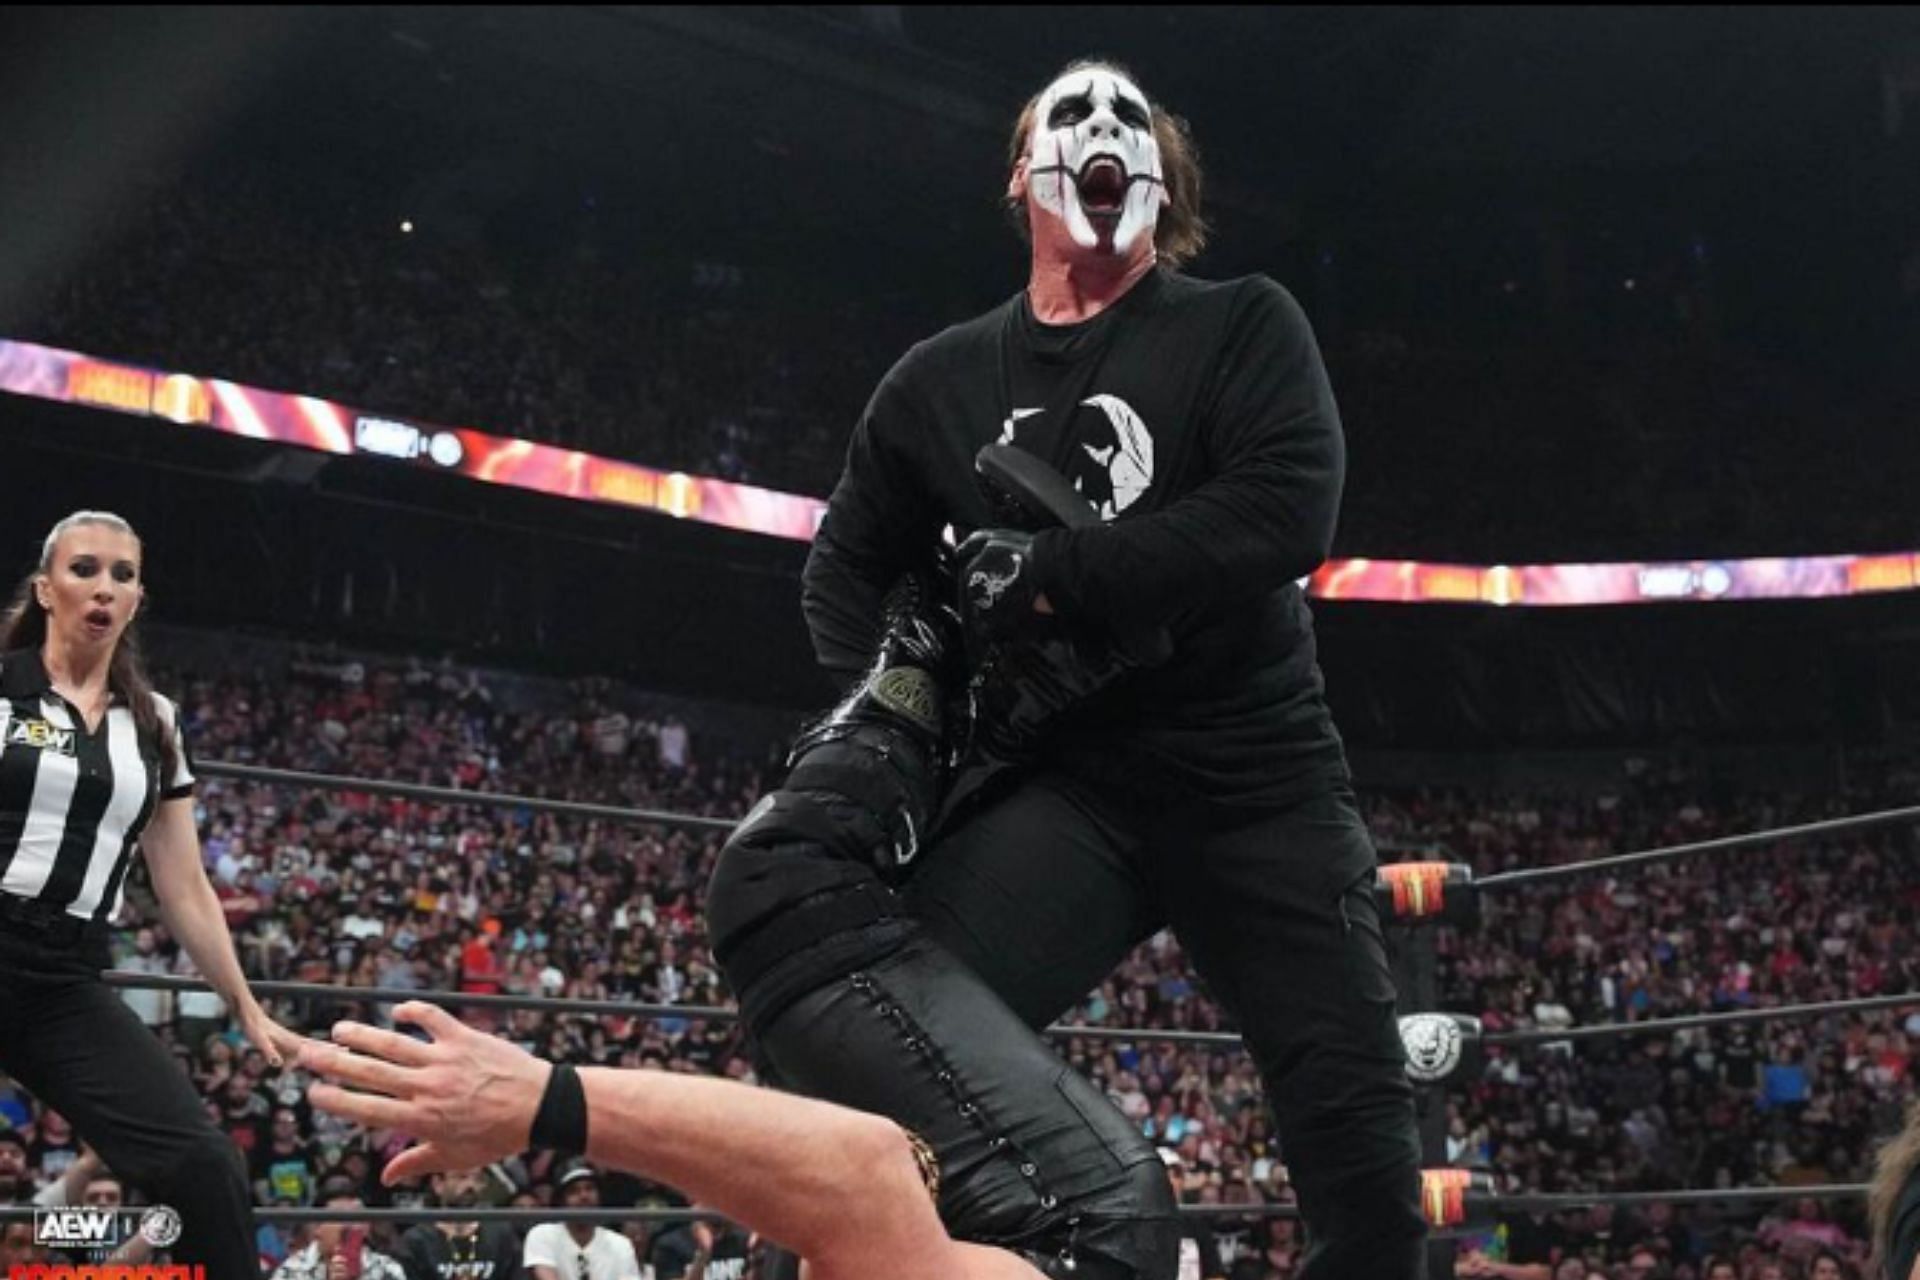 A wrestling veteran has some interesting thoughs about Sting